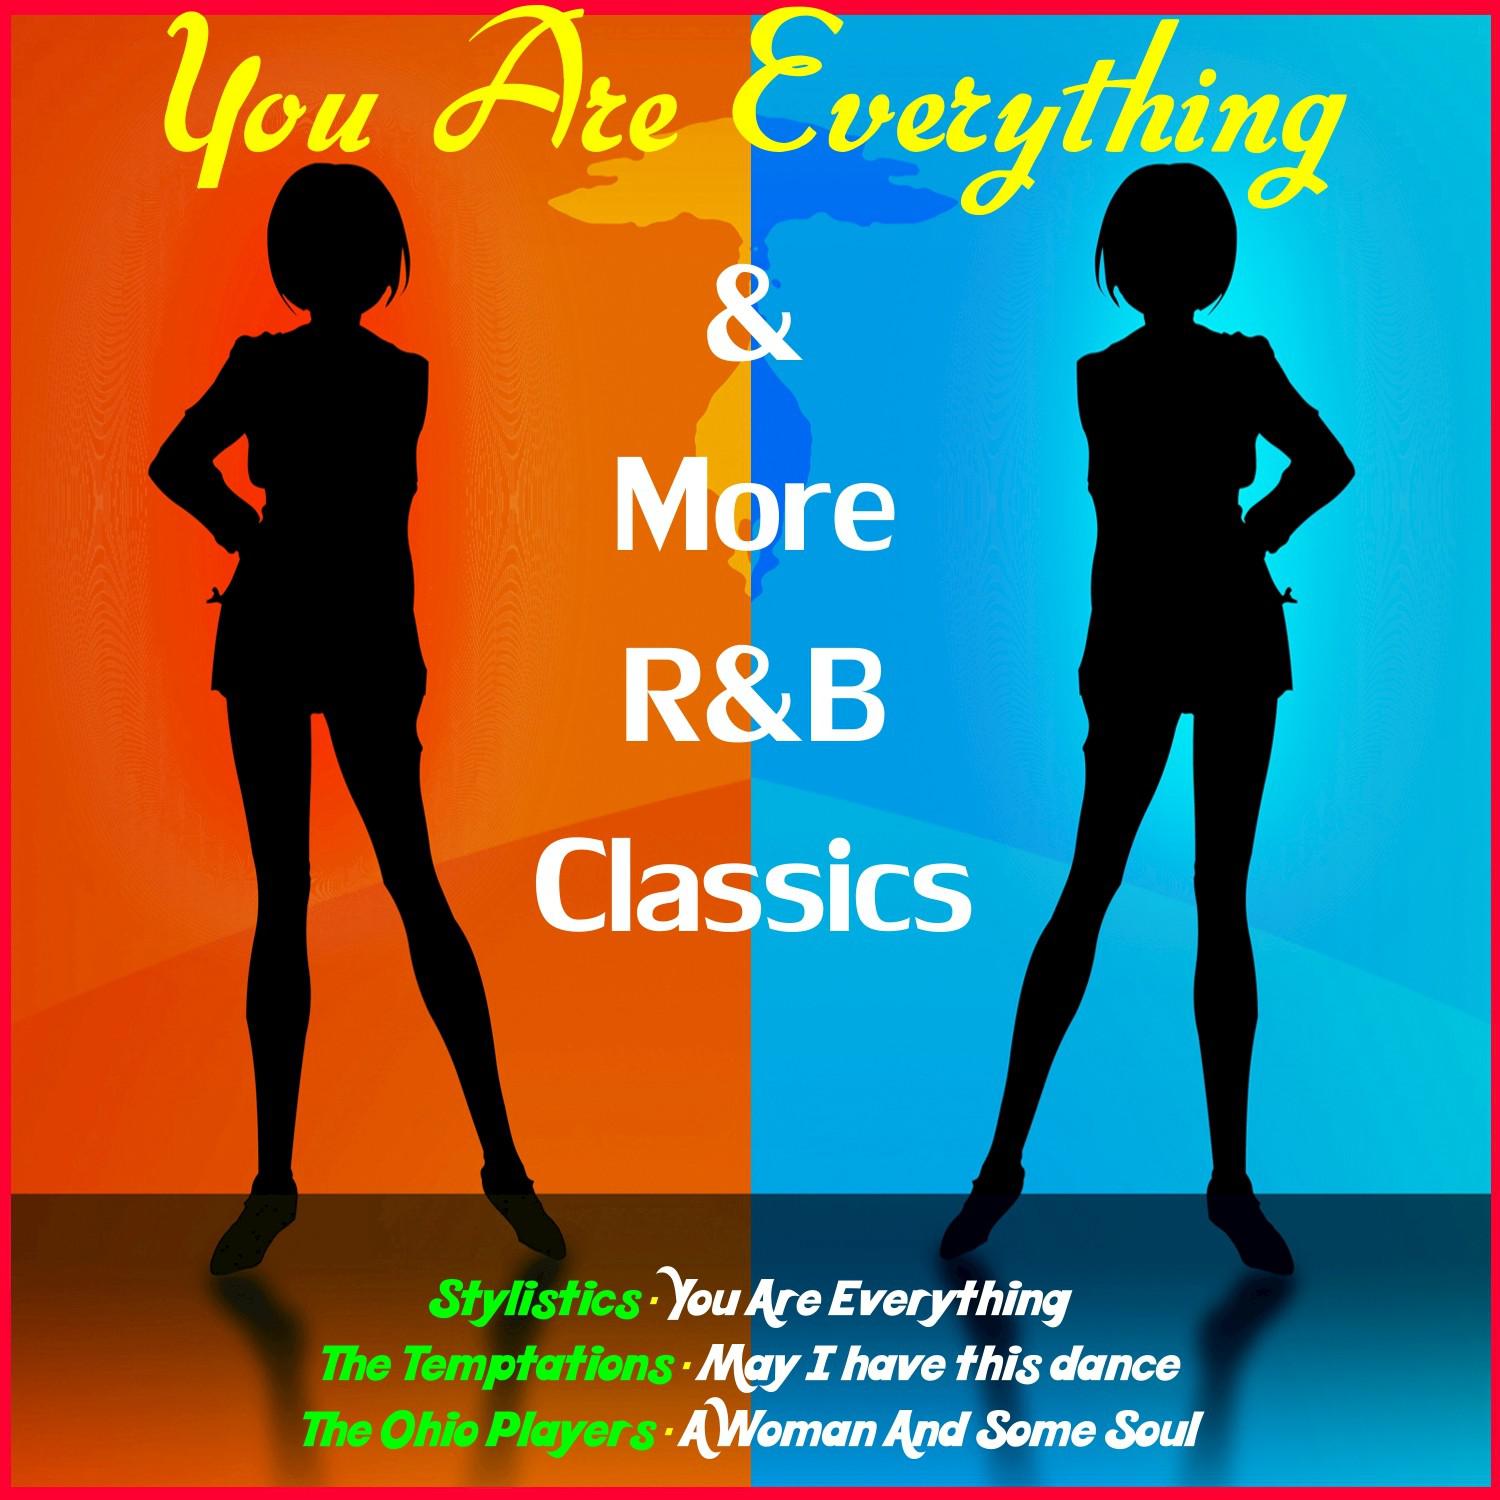 You Are Everything & More R&B Classics